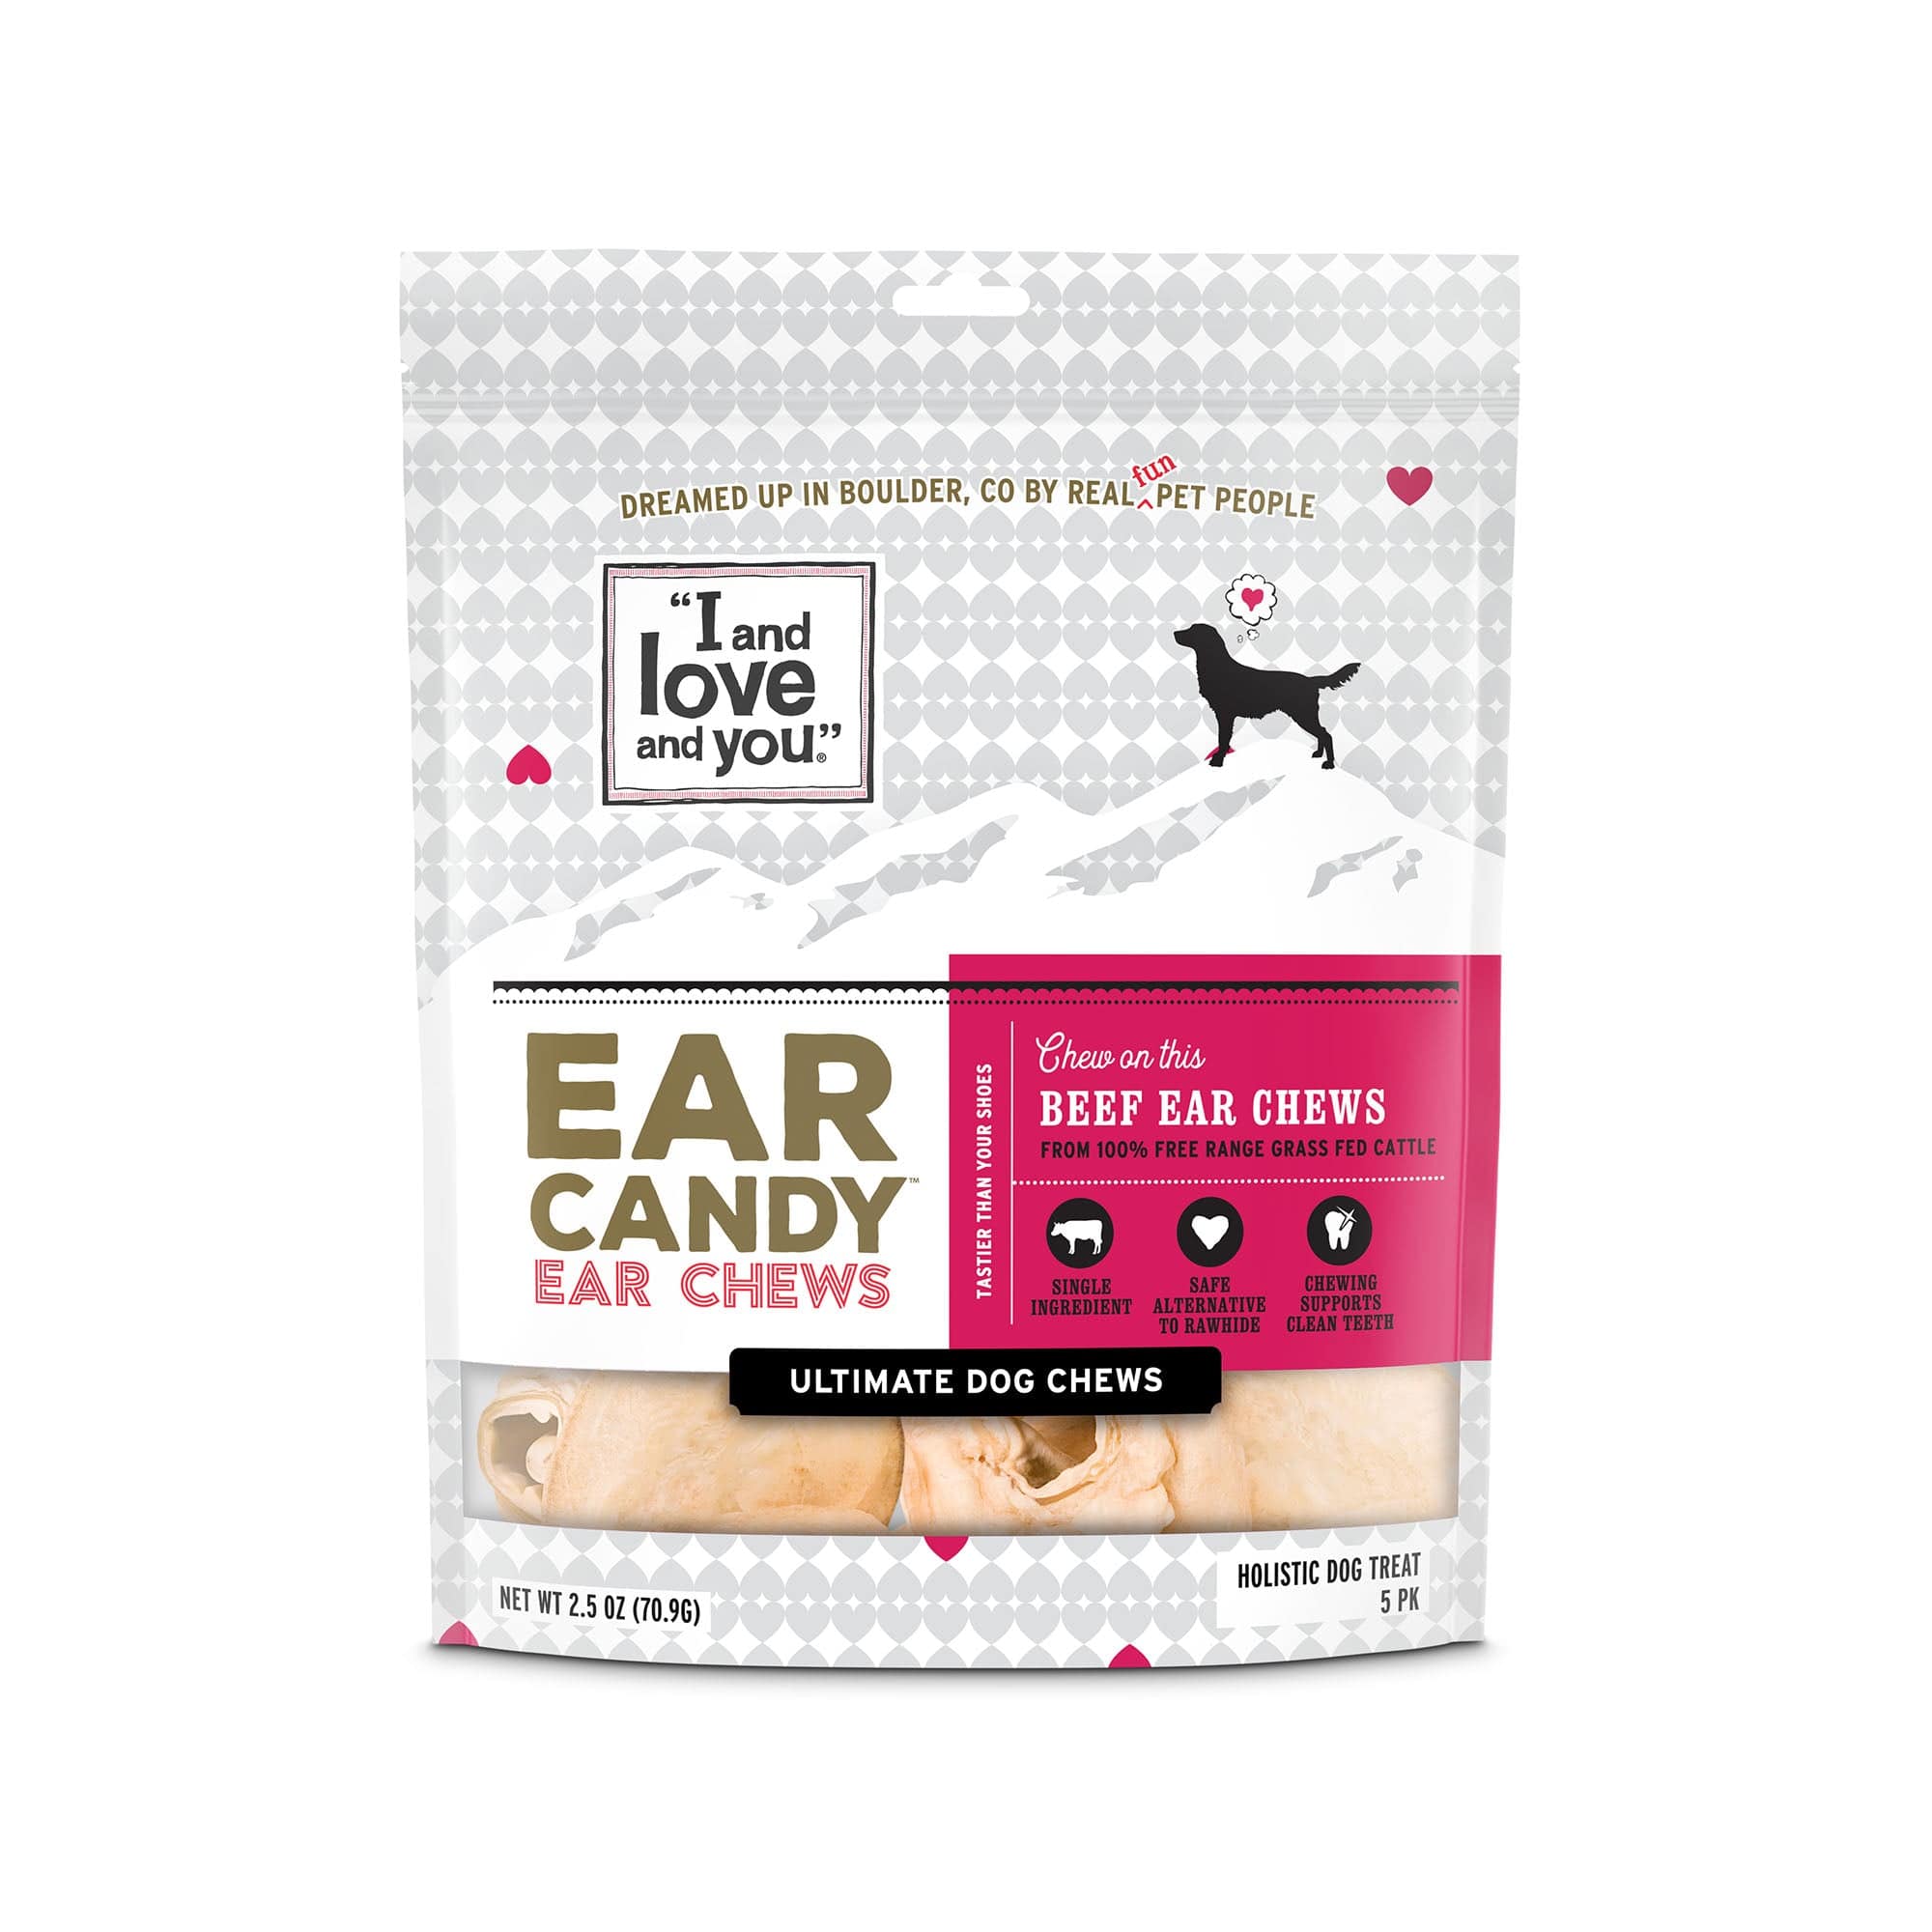 Ear Candy Beef Ear Chews packaging with dog silhouette, treats, and signs.